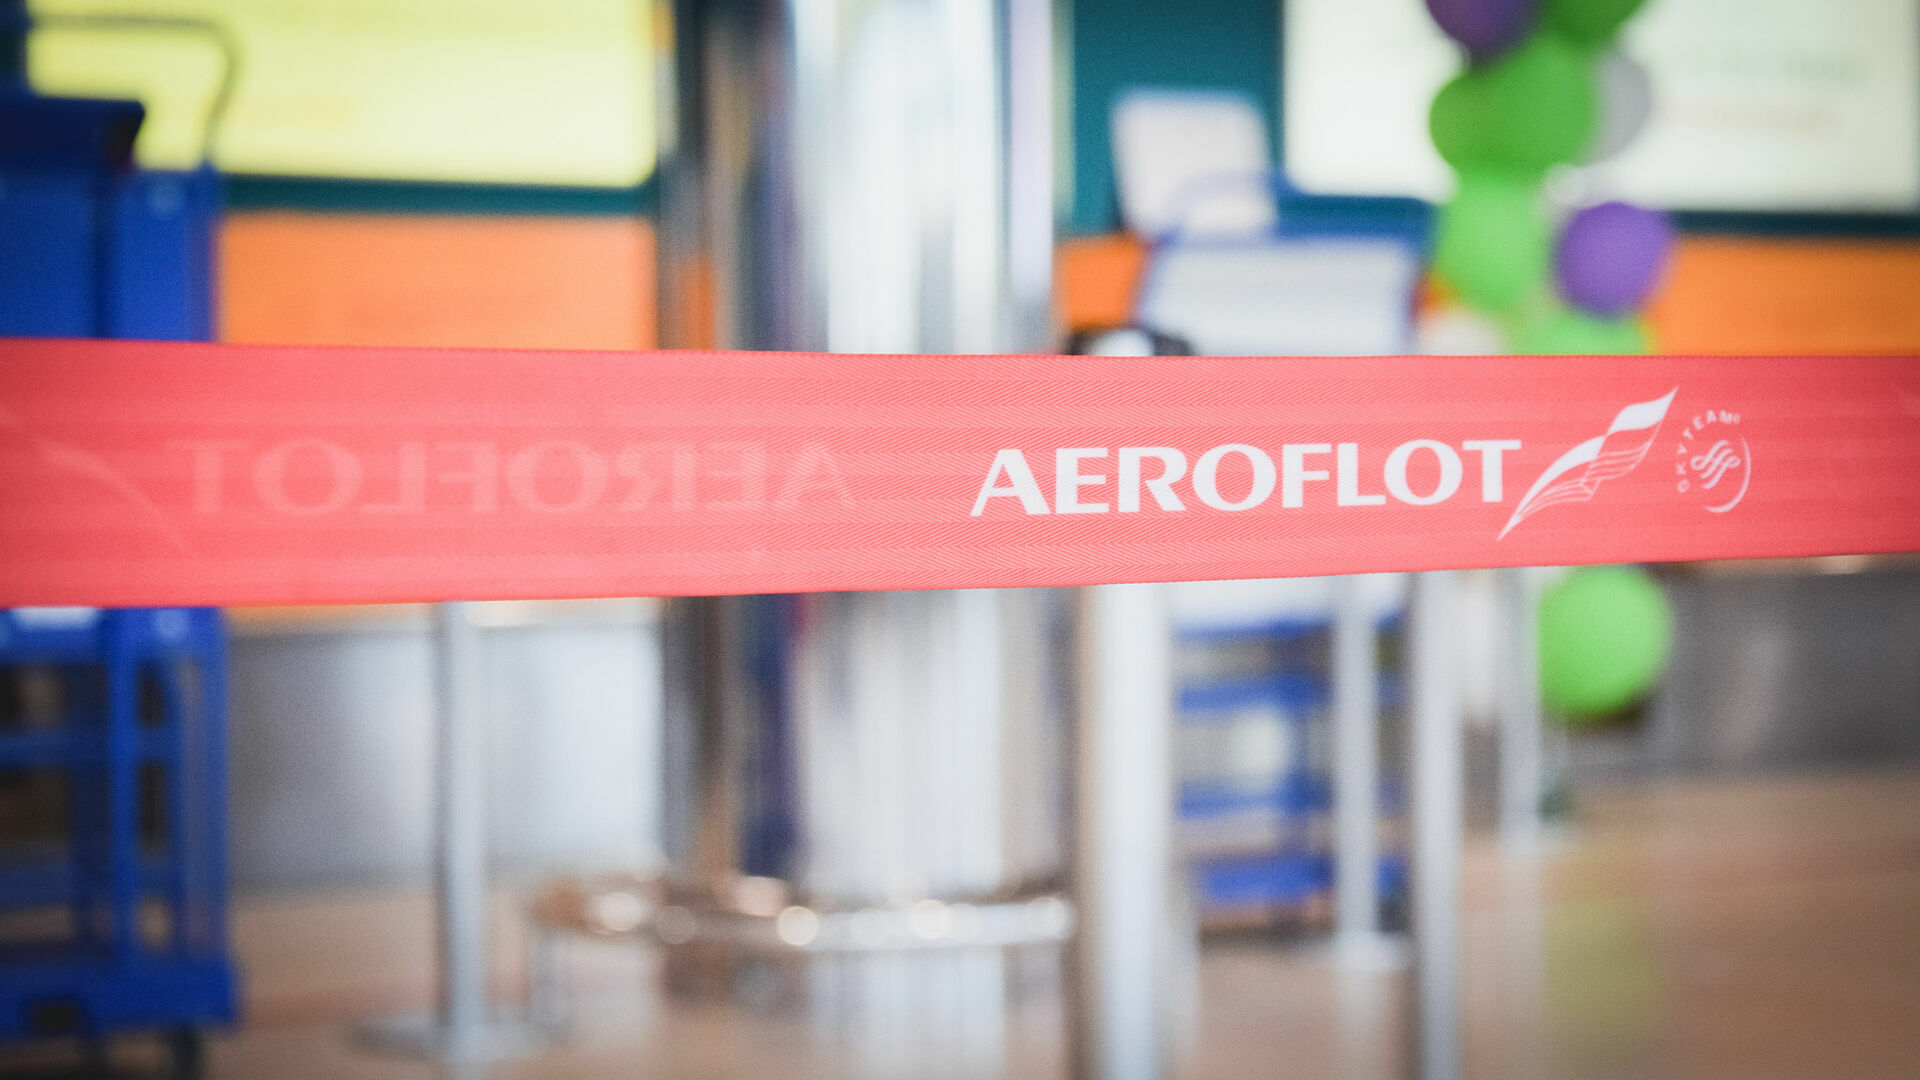 Aeroflot removed 500 people from the flight from Dubai: there are two versions of what happened